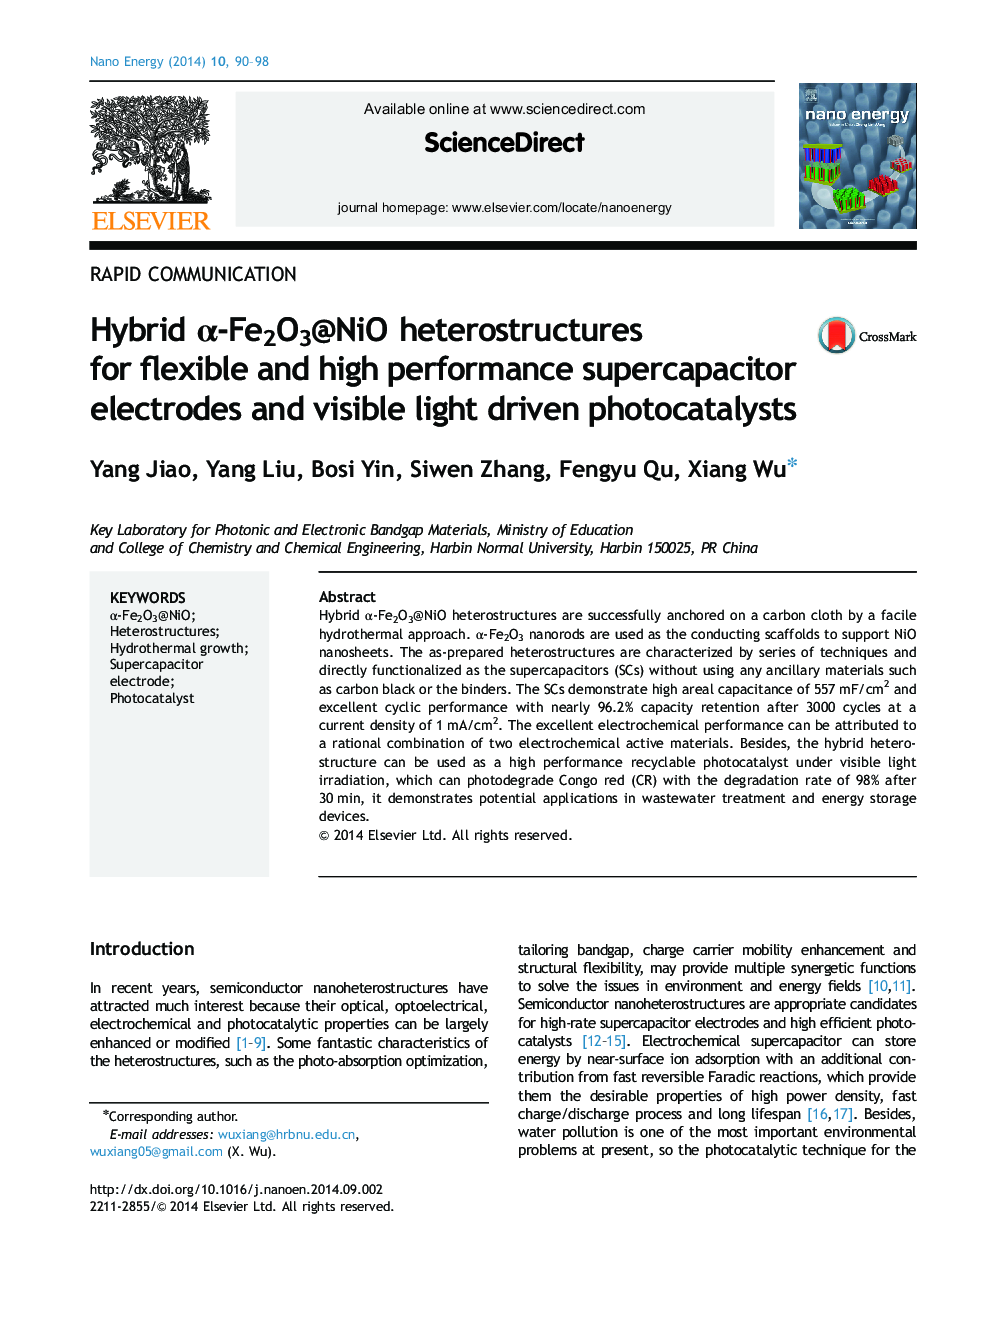 Hybrid Î±-Fe2O3@NiO heterostructures for flexible and high performance supercapacitor electrodes and visible light driven photocatalysts